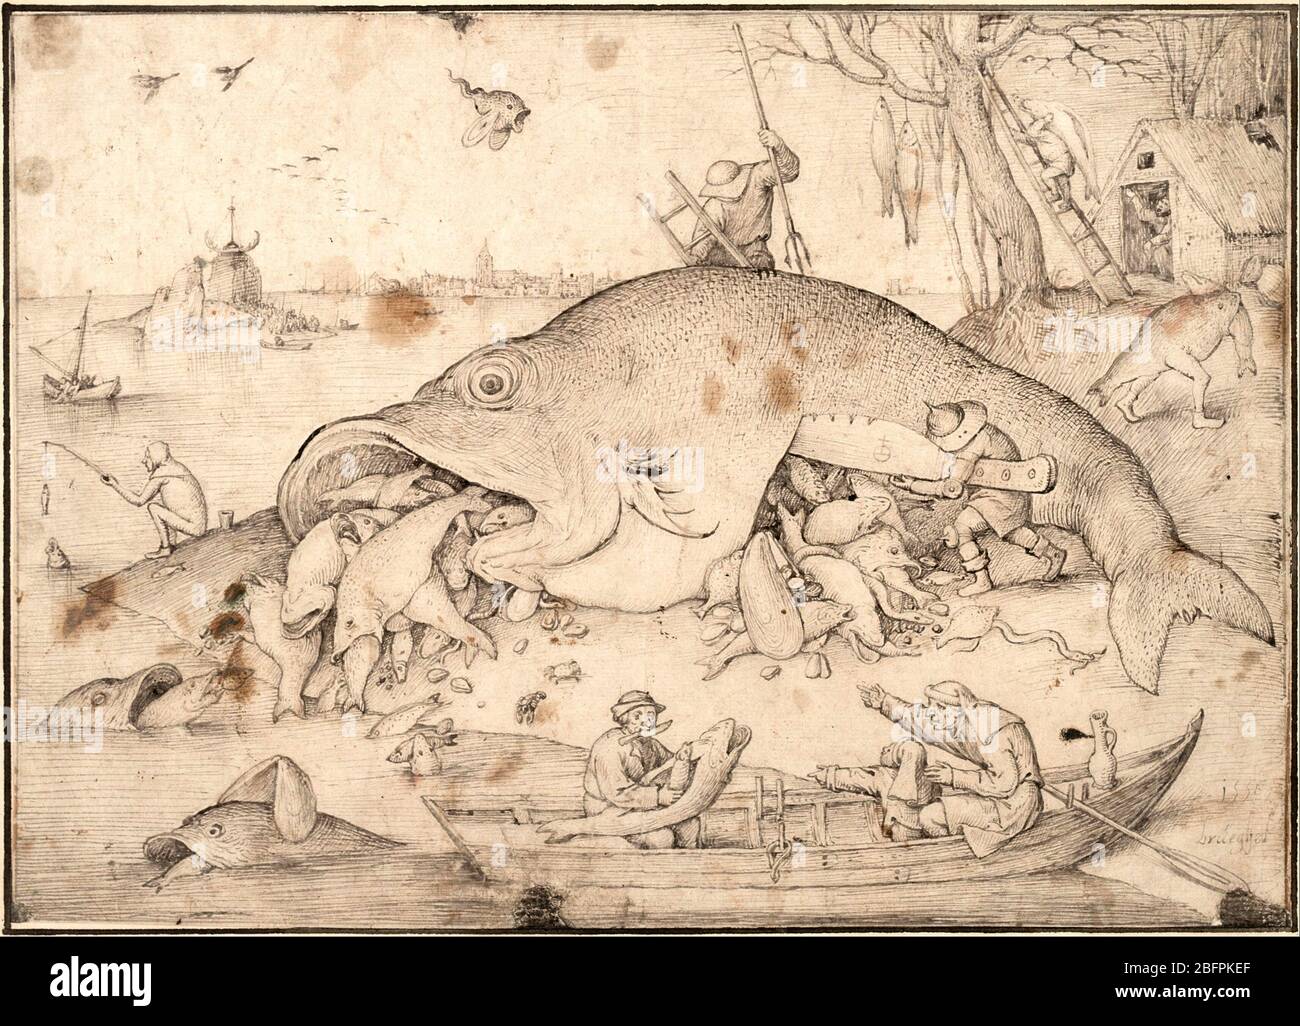 The Big Fish Eat the Little Fish, Bruegel's drawing for a print, 1556, by Pieter Bruegel the Elder Stock Photo